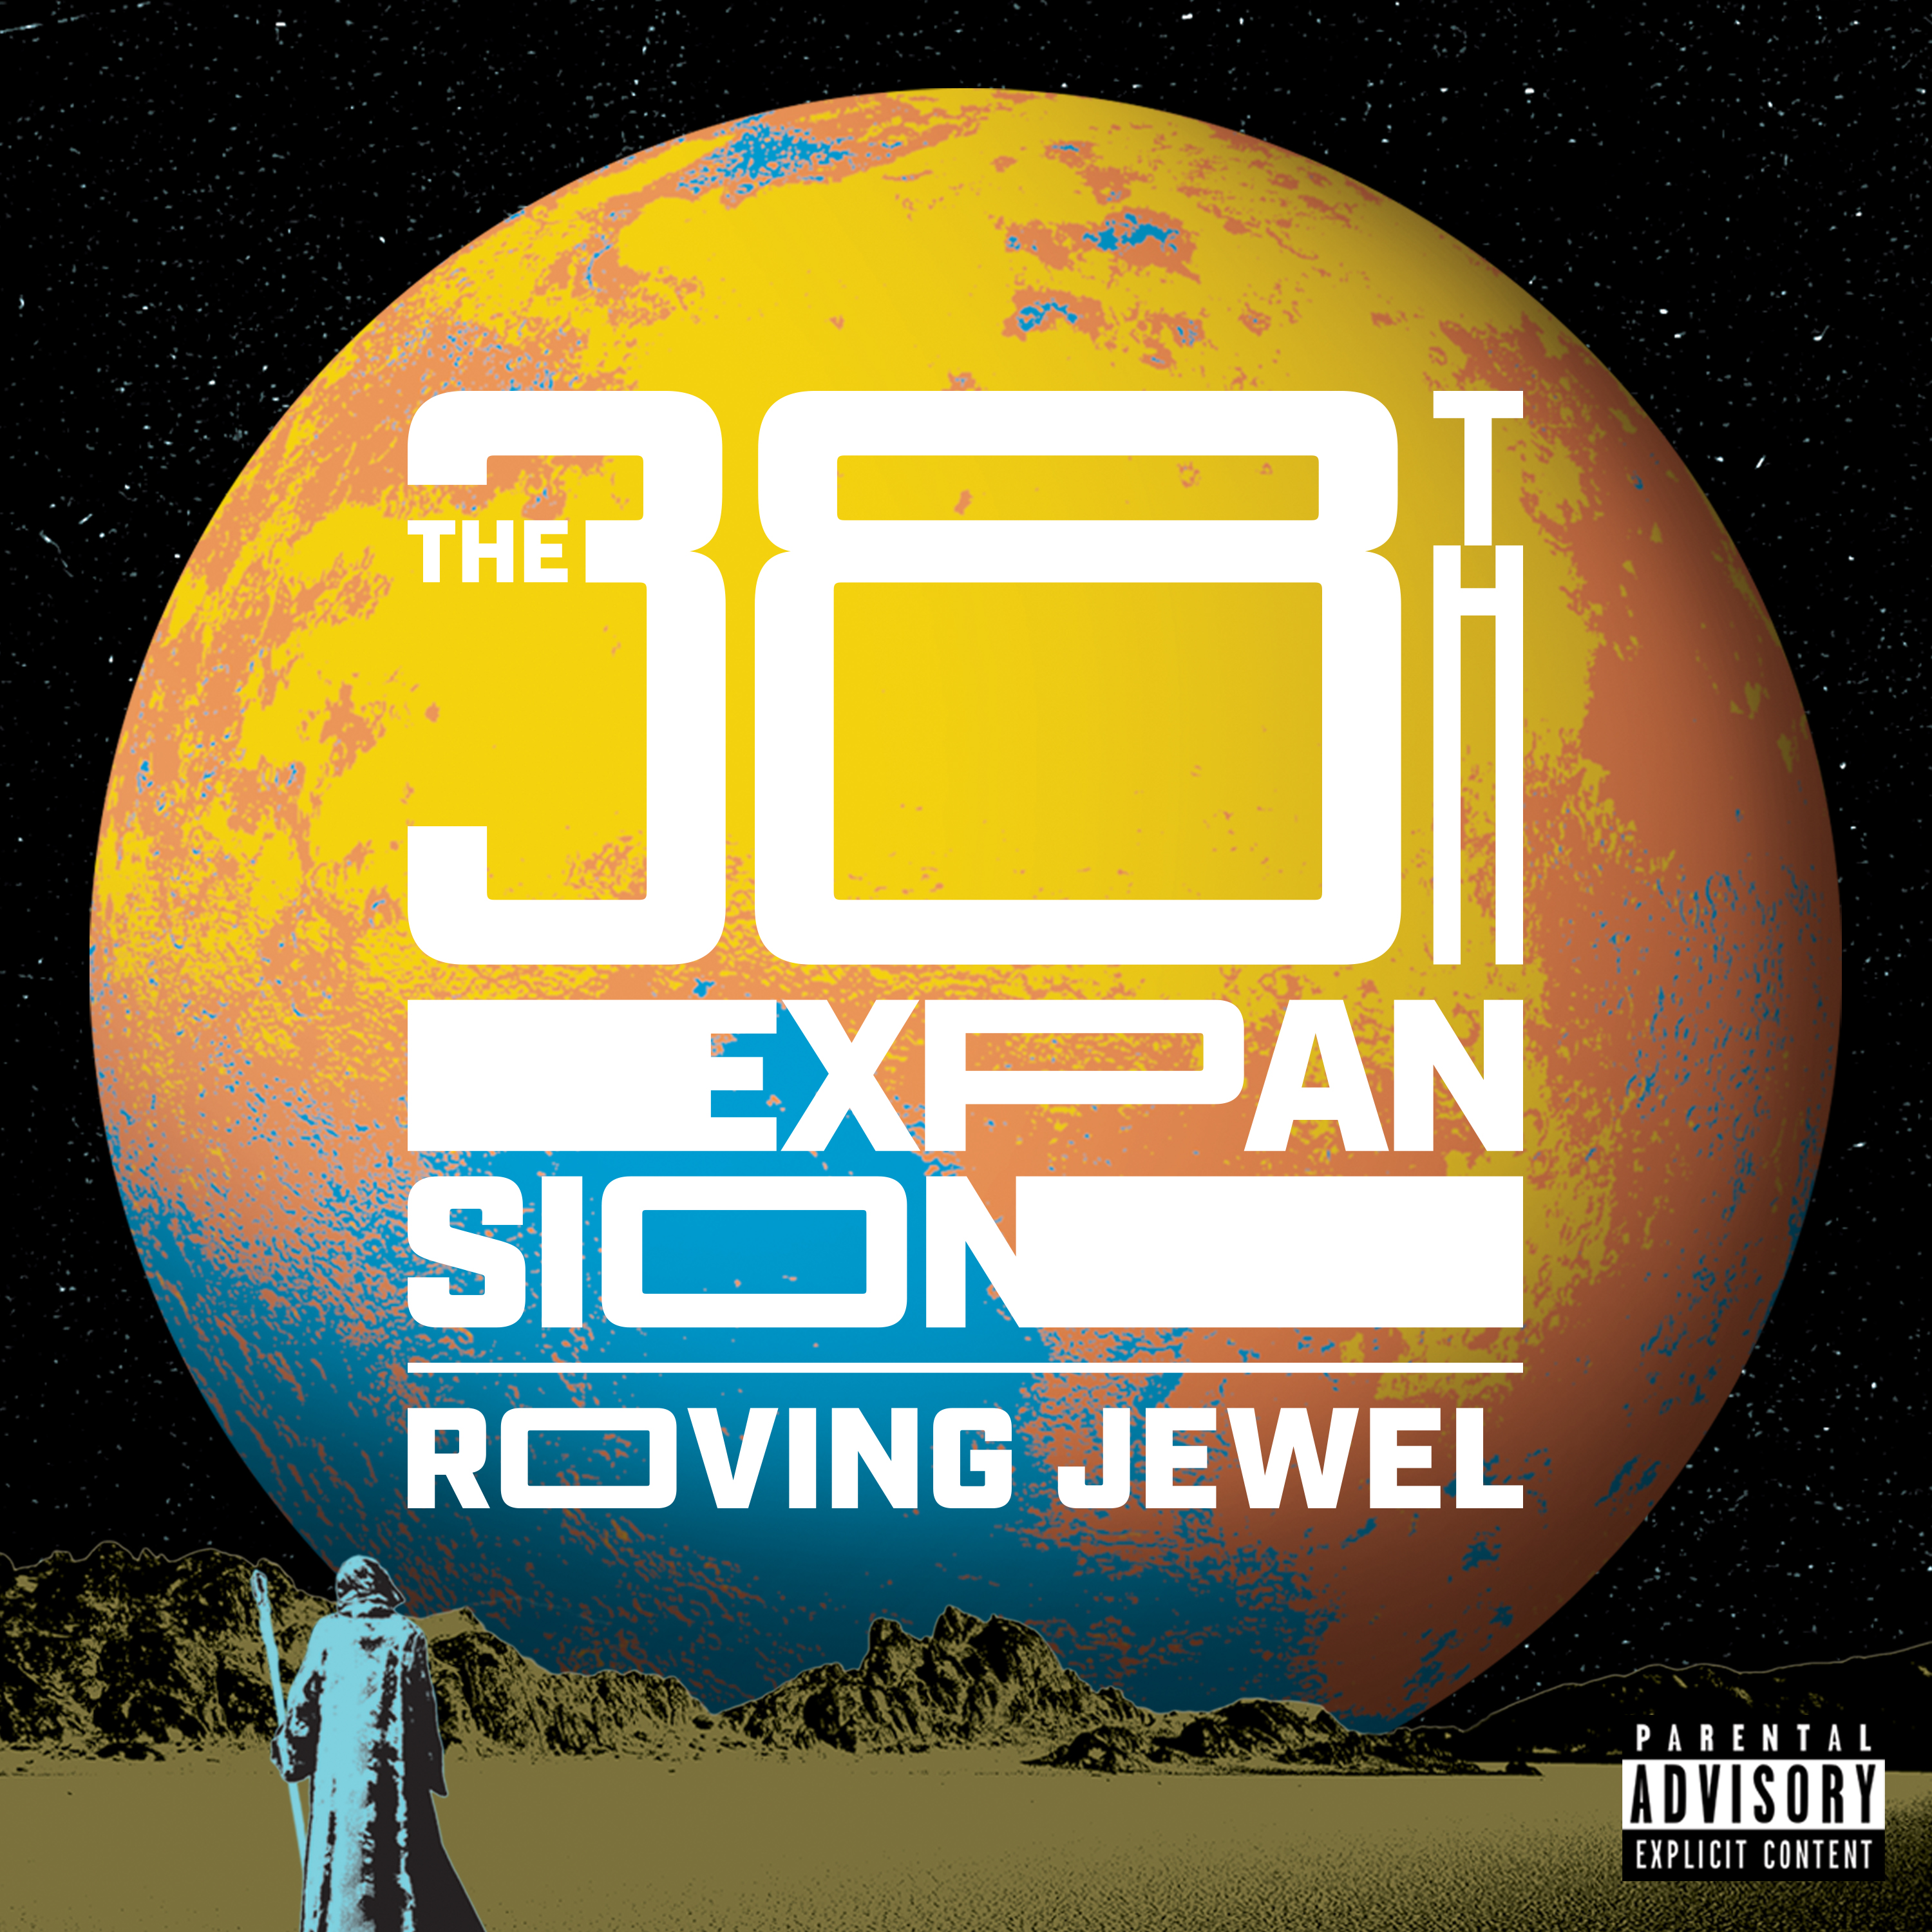 ROVING JEWEL - THE 38TH EXPANSION ON SPOTIFY